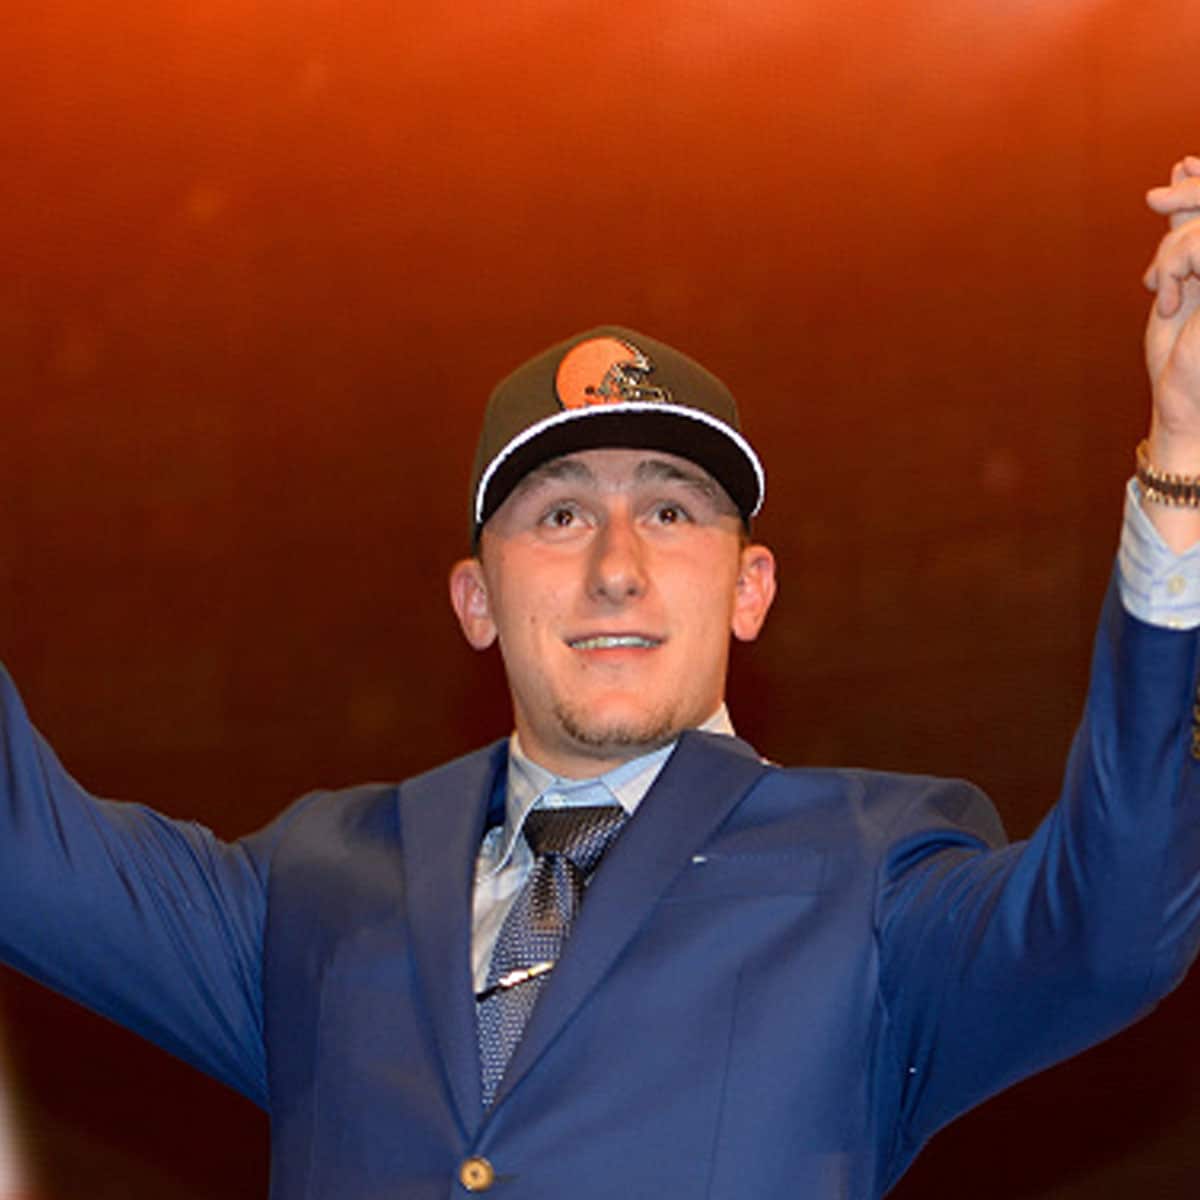 Johnny Manziel (QB) of Texas A&M is drafted 22nd by the Cleveland Browns during the first round of the NFL Draft